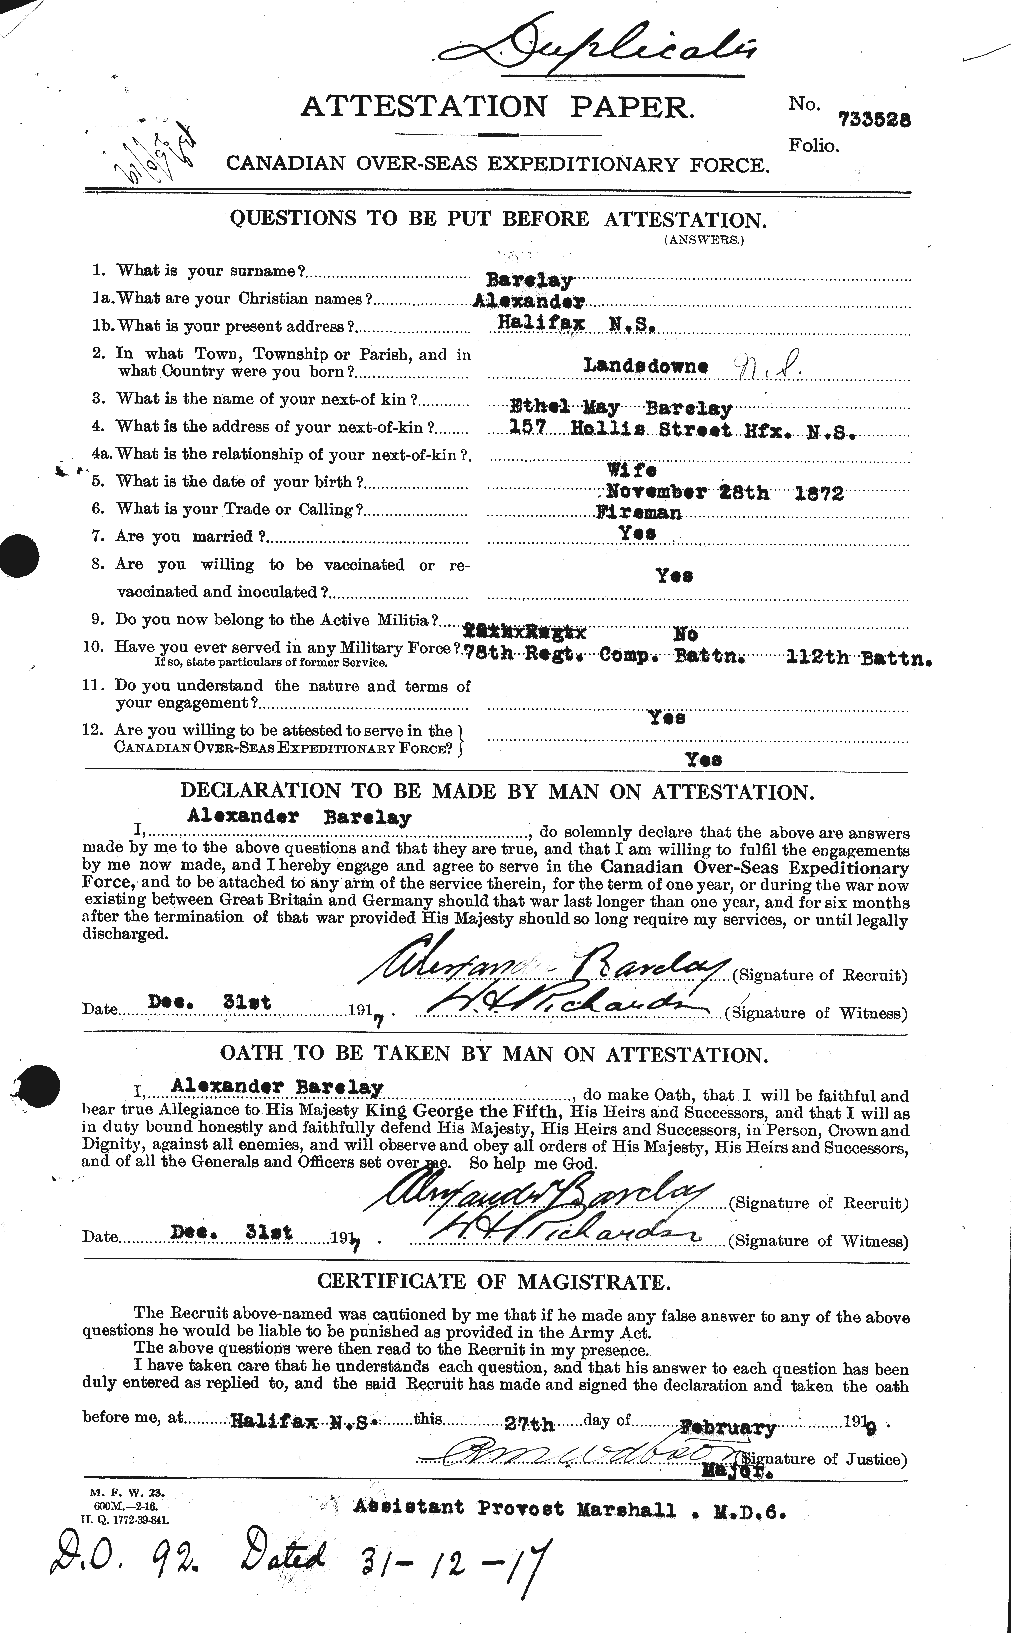 Personnel Records of the First World War - CEF 220970a